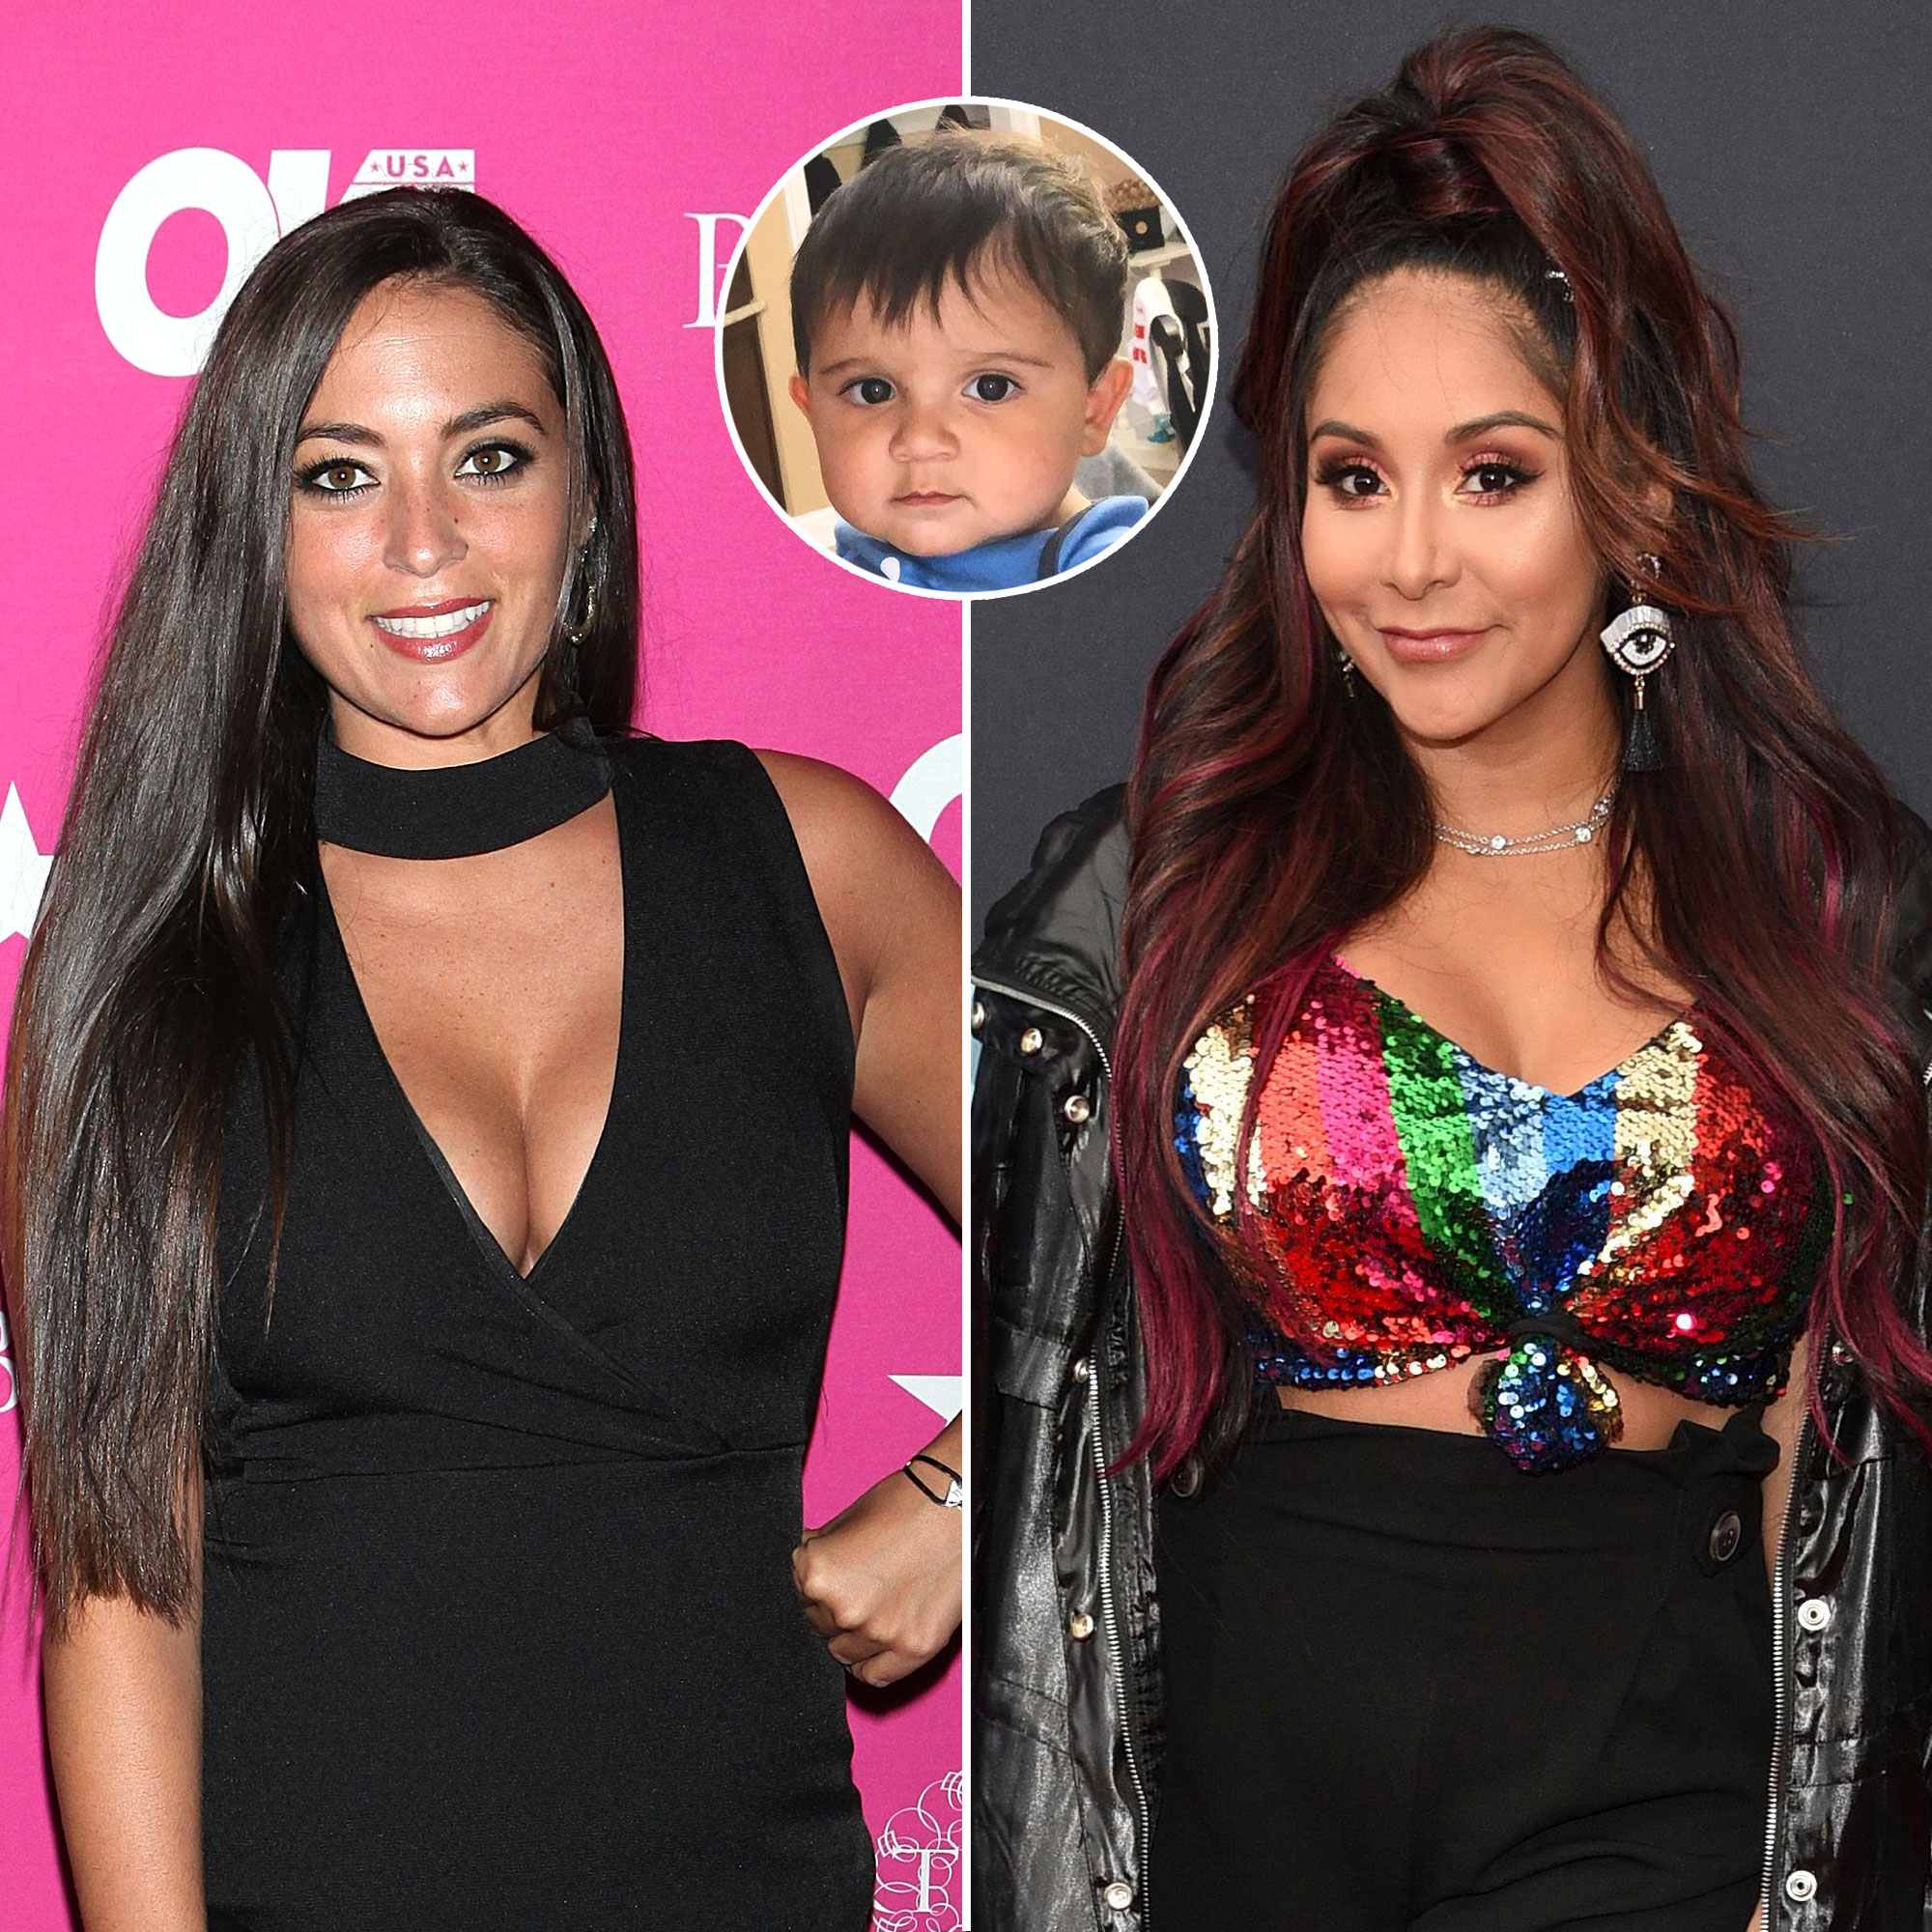 Photos and Pictures - Jersey Shore star Nicole Snooki Polizzi